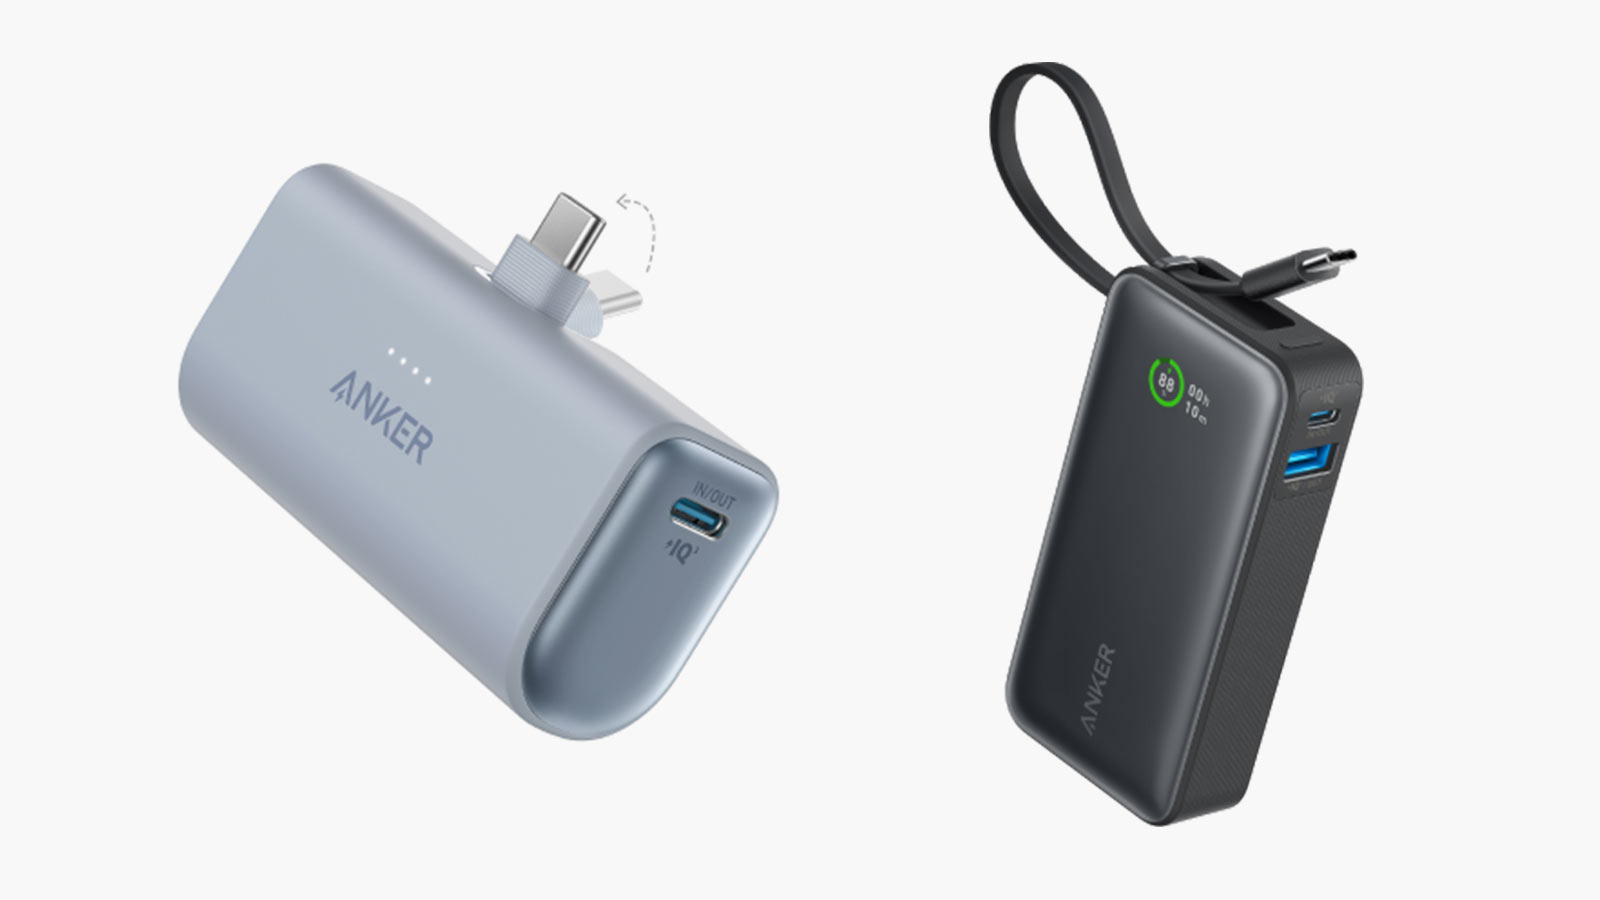 Introducing The Anker Nano USB-C Chargers That Redefine Fast And